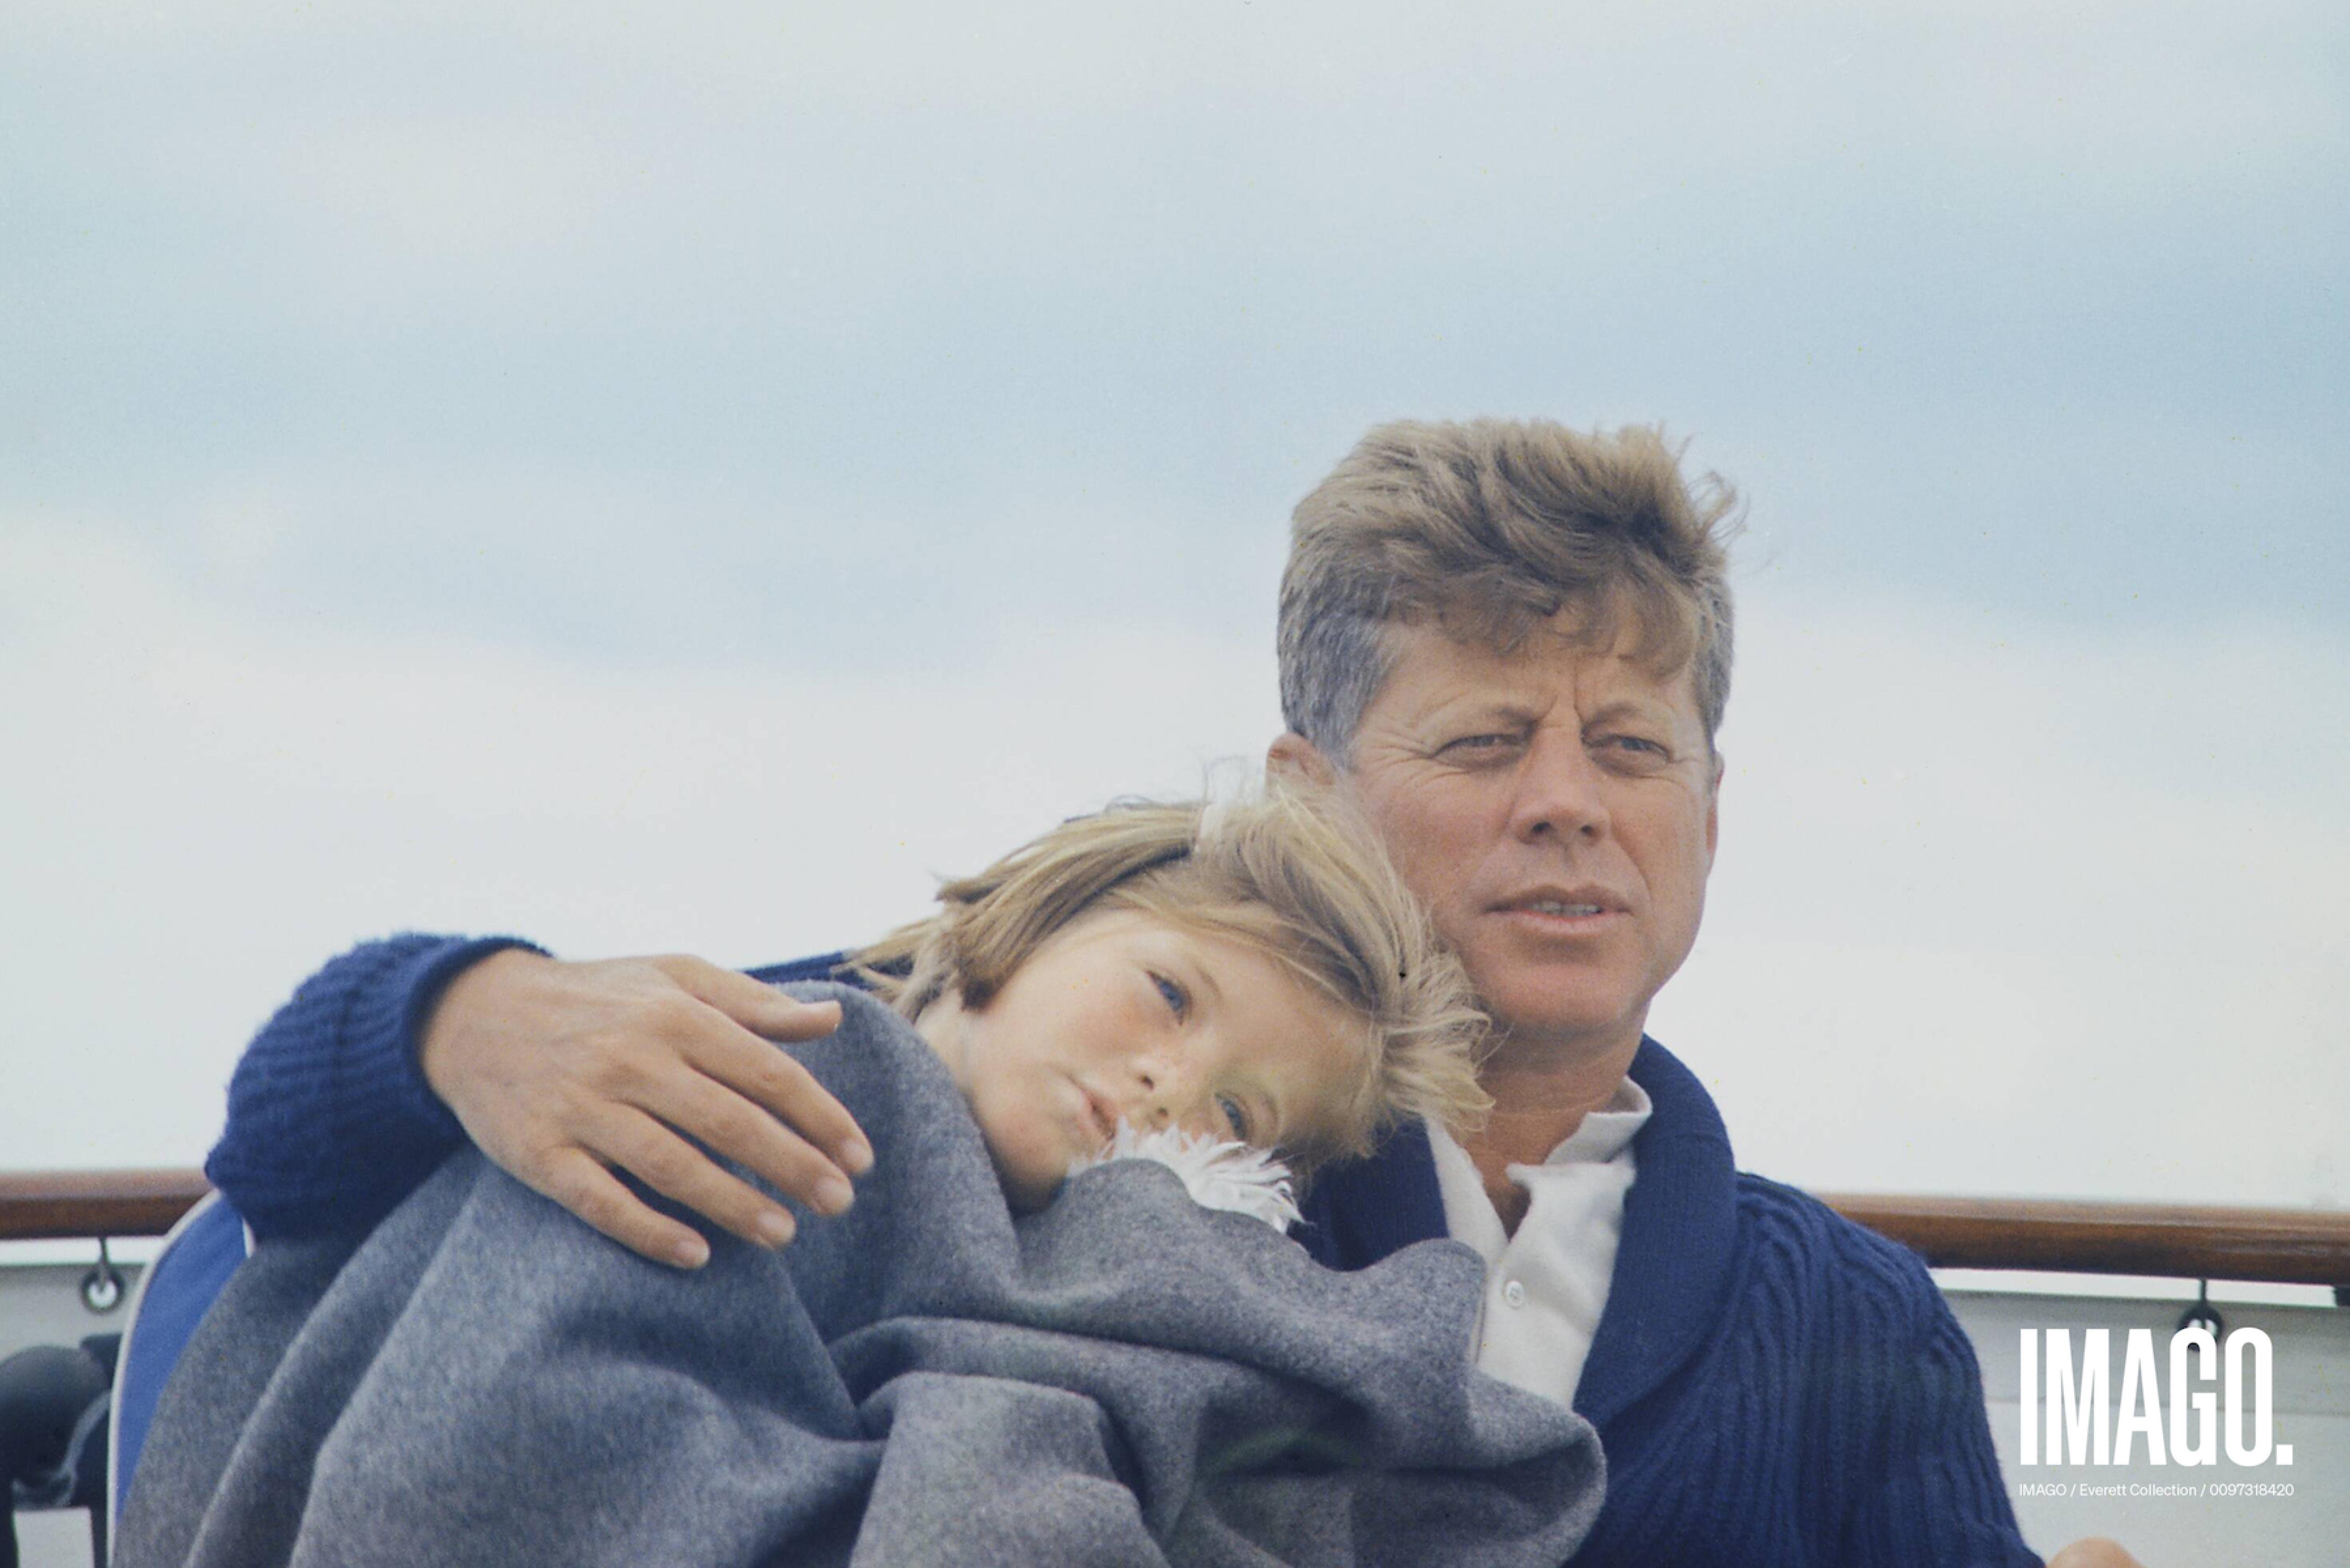 President John Kennedy with his daughter Caroline. He has his arm around her, they both look into the distance. 